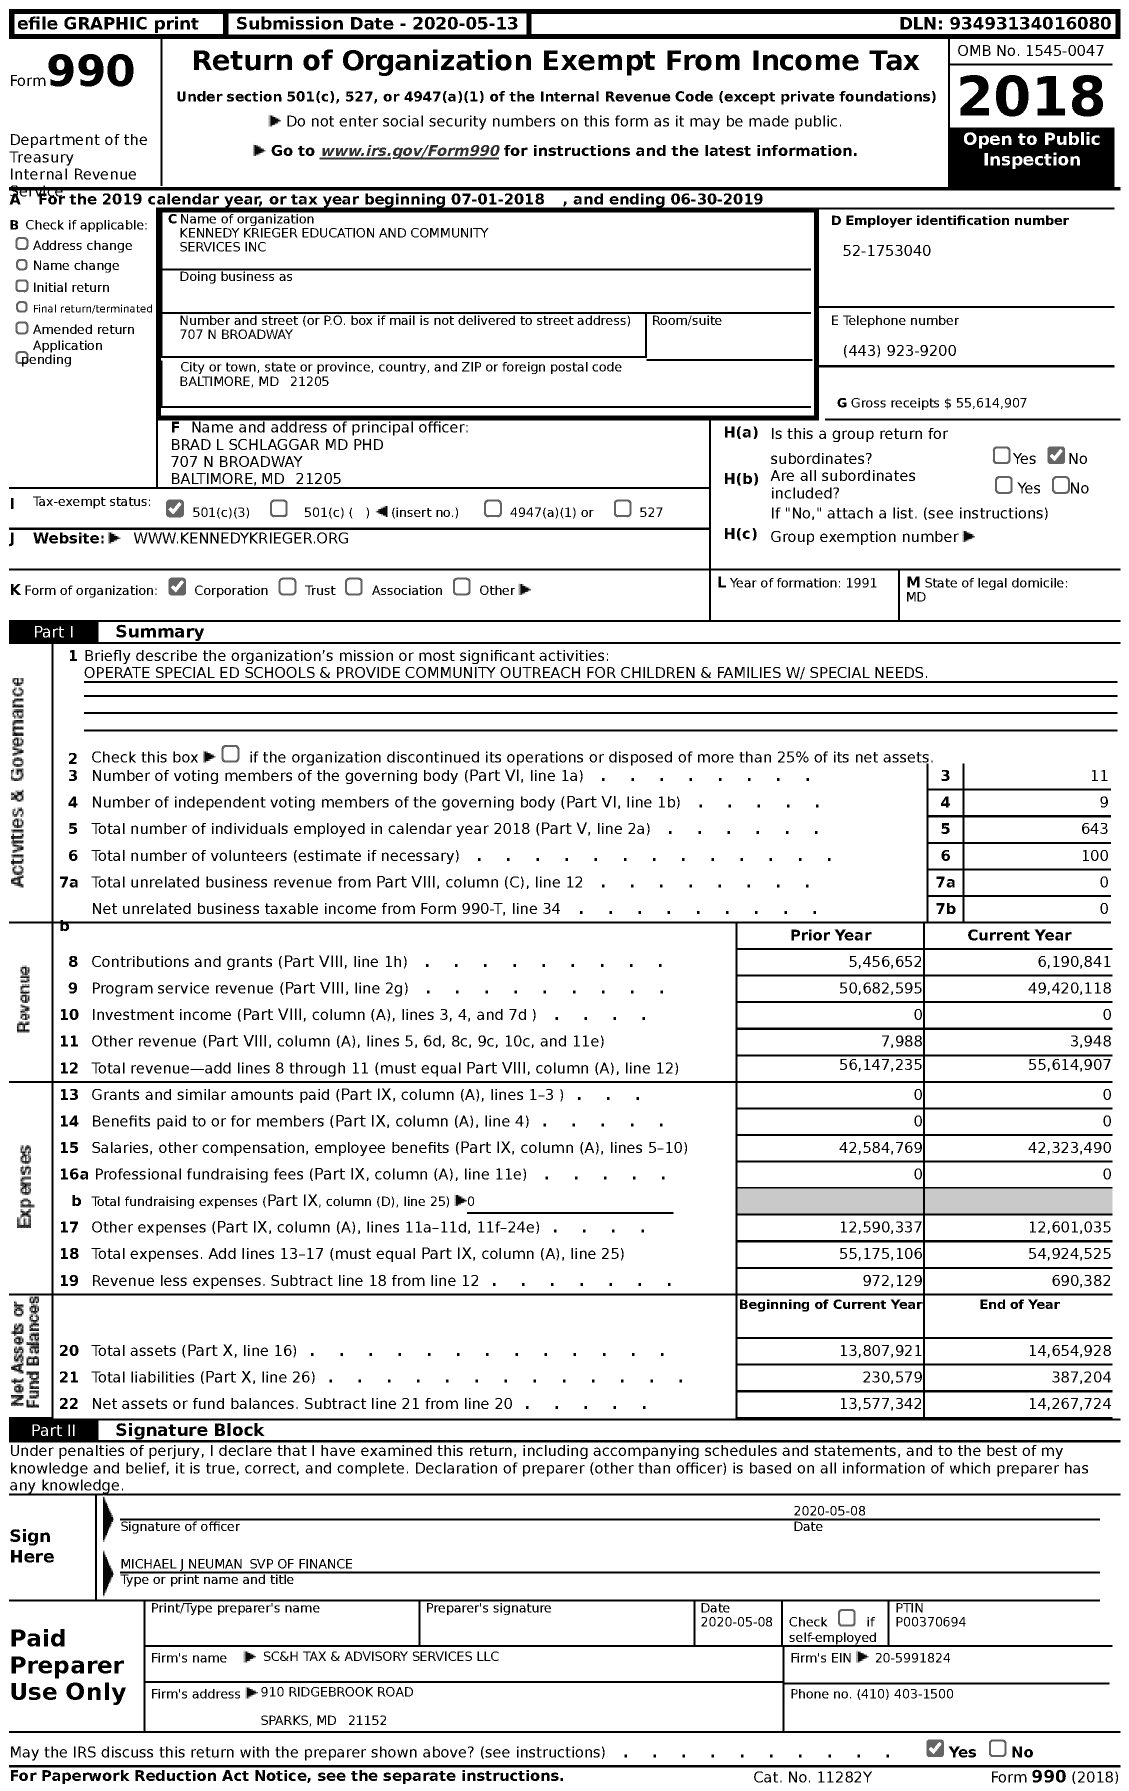 Image of first page of 2018 Form 990 for Kennedy Krieger Education and Community Services